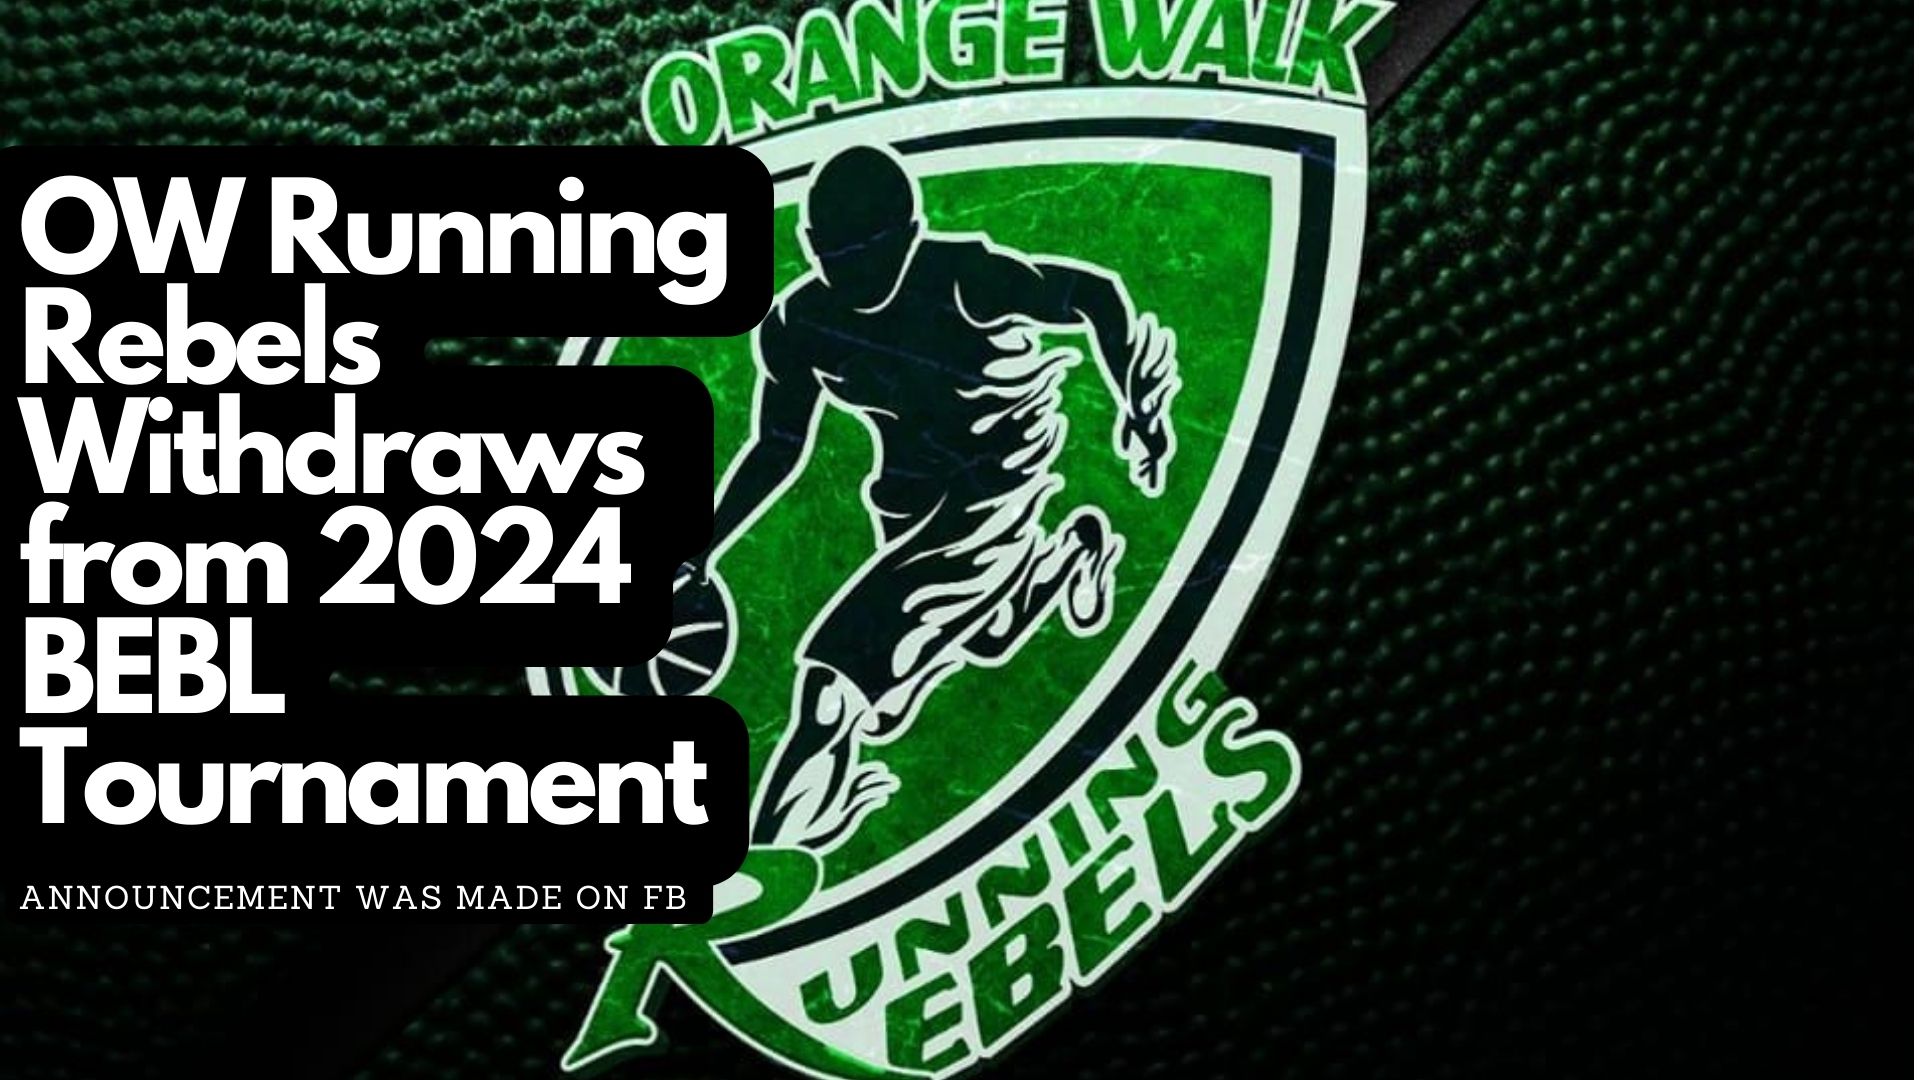 OW Running Rebels Withdraws from 2024 BEBL Tournament 